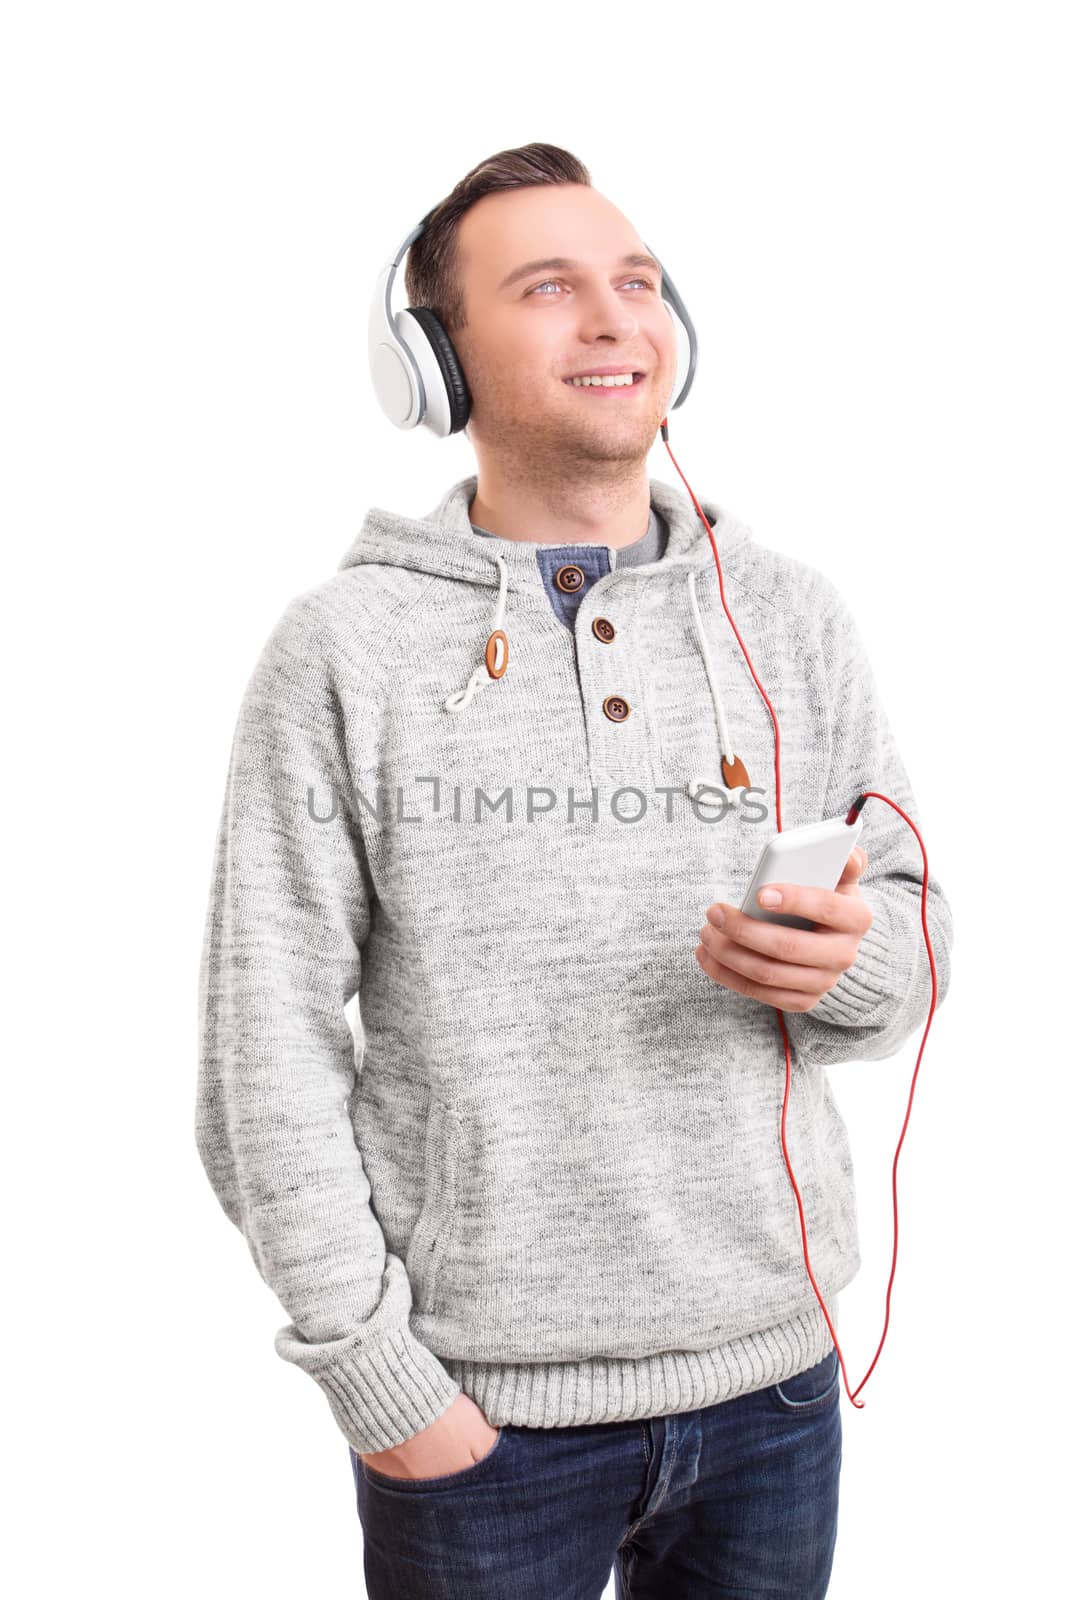 Music concept. Handsome casual young man with white headphones listening to music on his phone, enjoying and smiling, isolated on white background. Young man listening to music on his headphones.